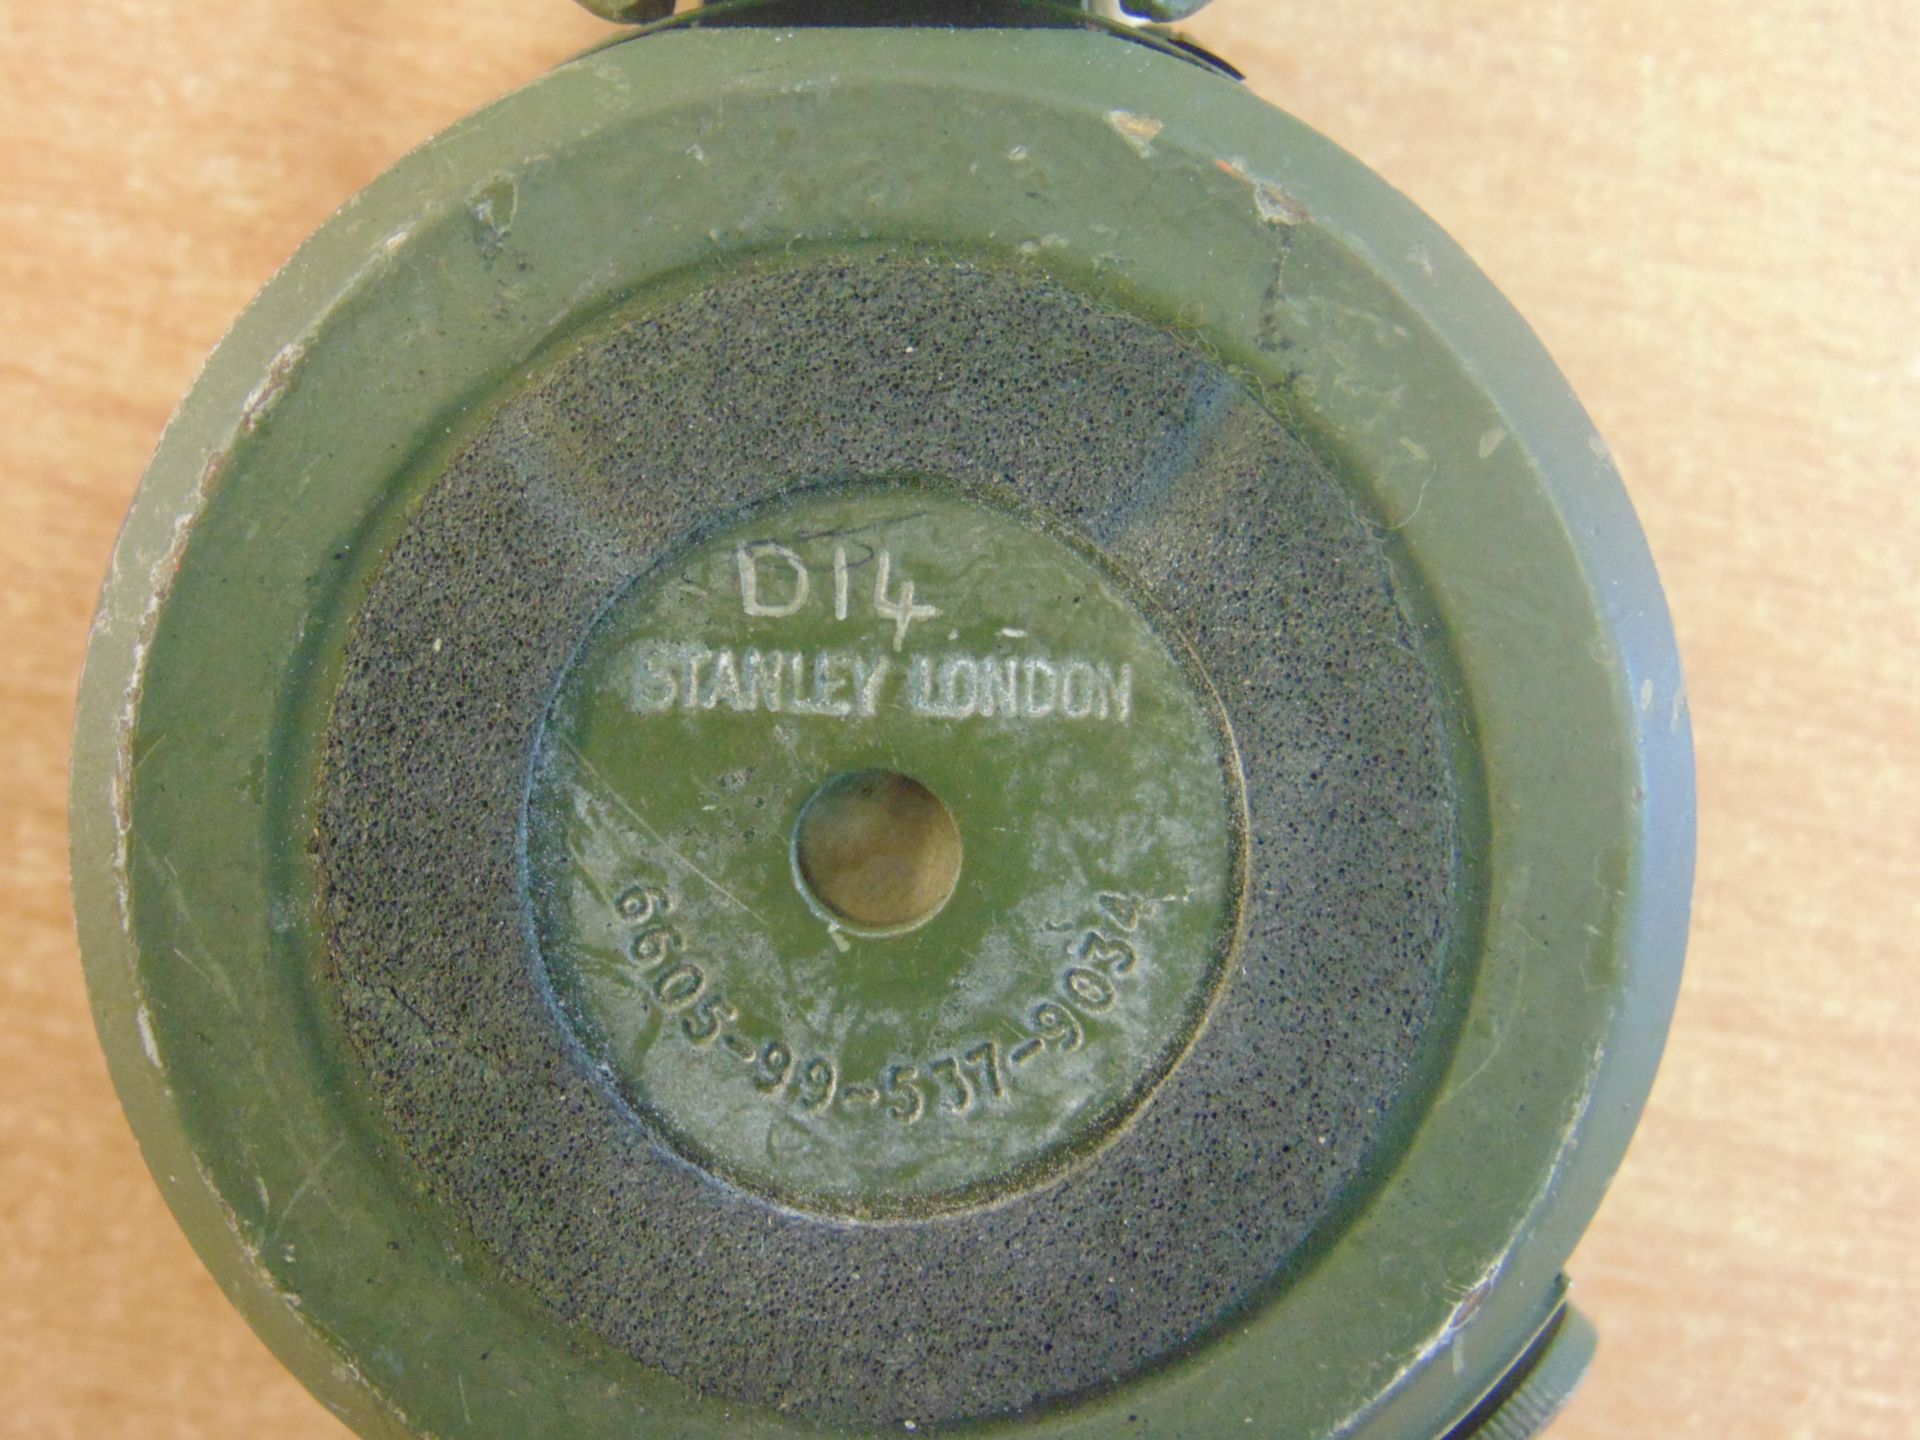 STANLEY LONDON BRASS PRISMATIC COMPASS BRITISH ARMY ISSUE NATO MARKS - Image 6 of 7